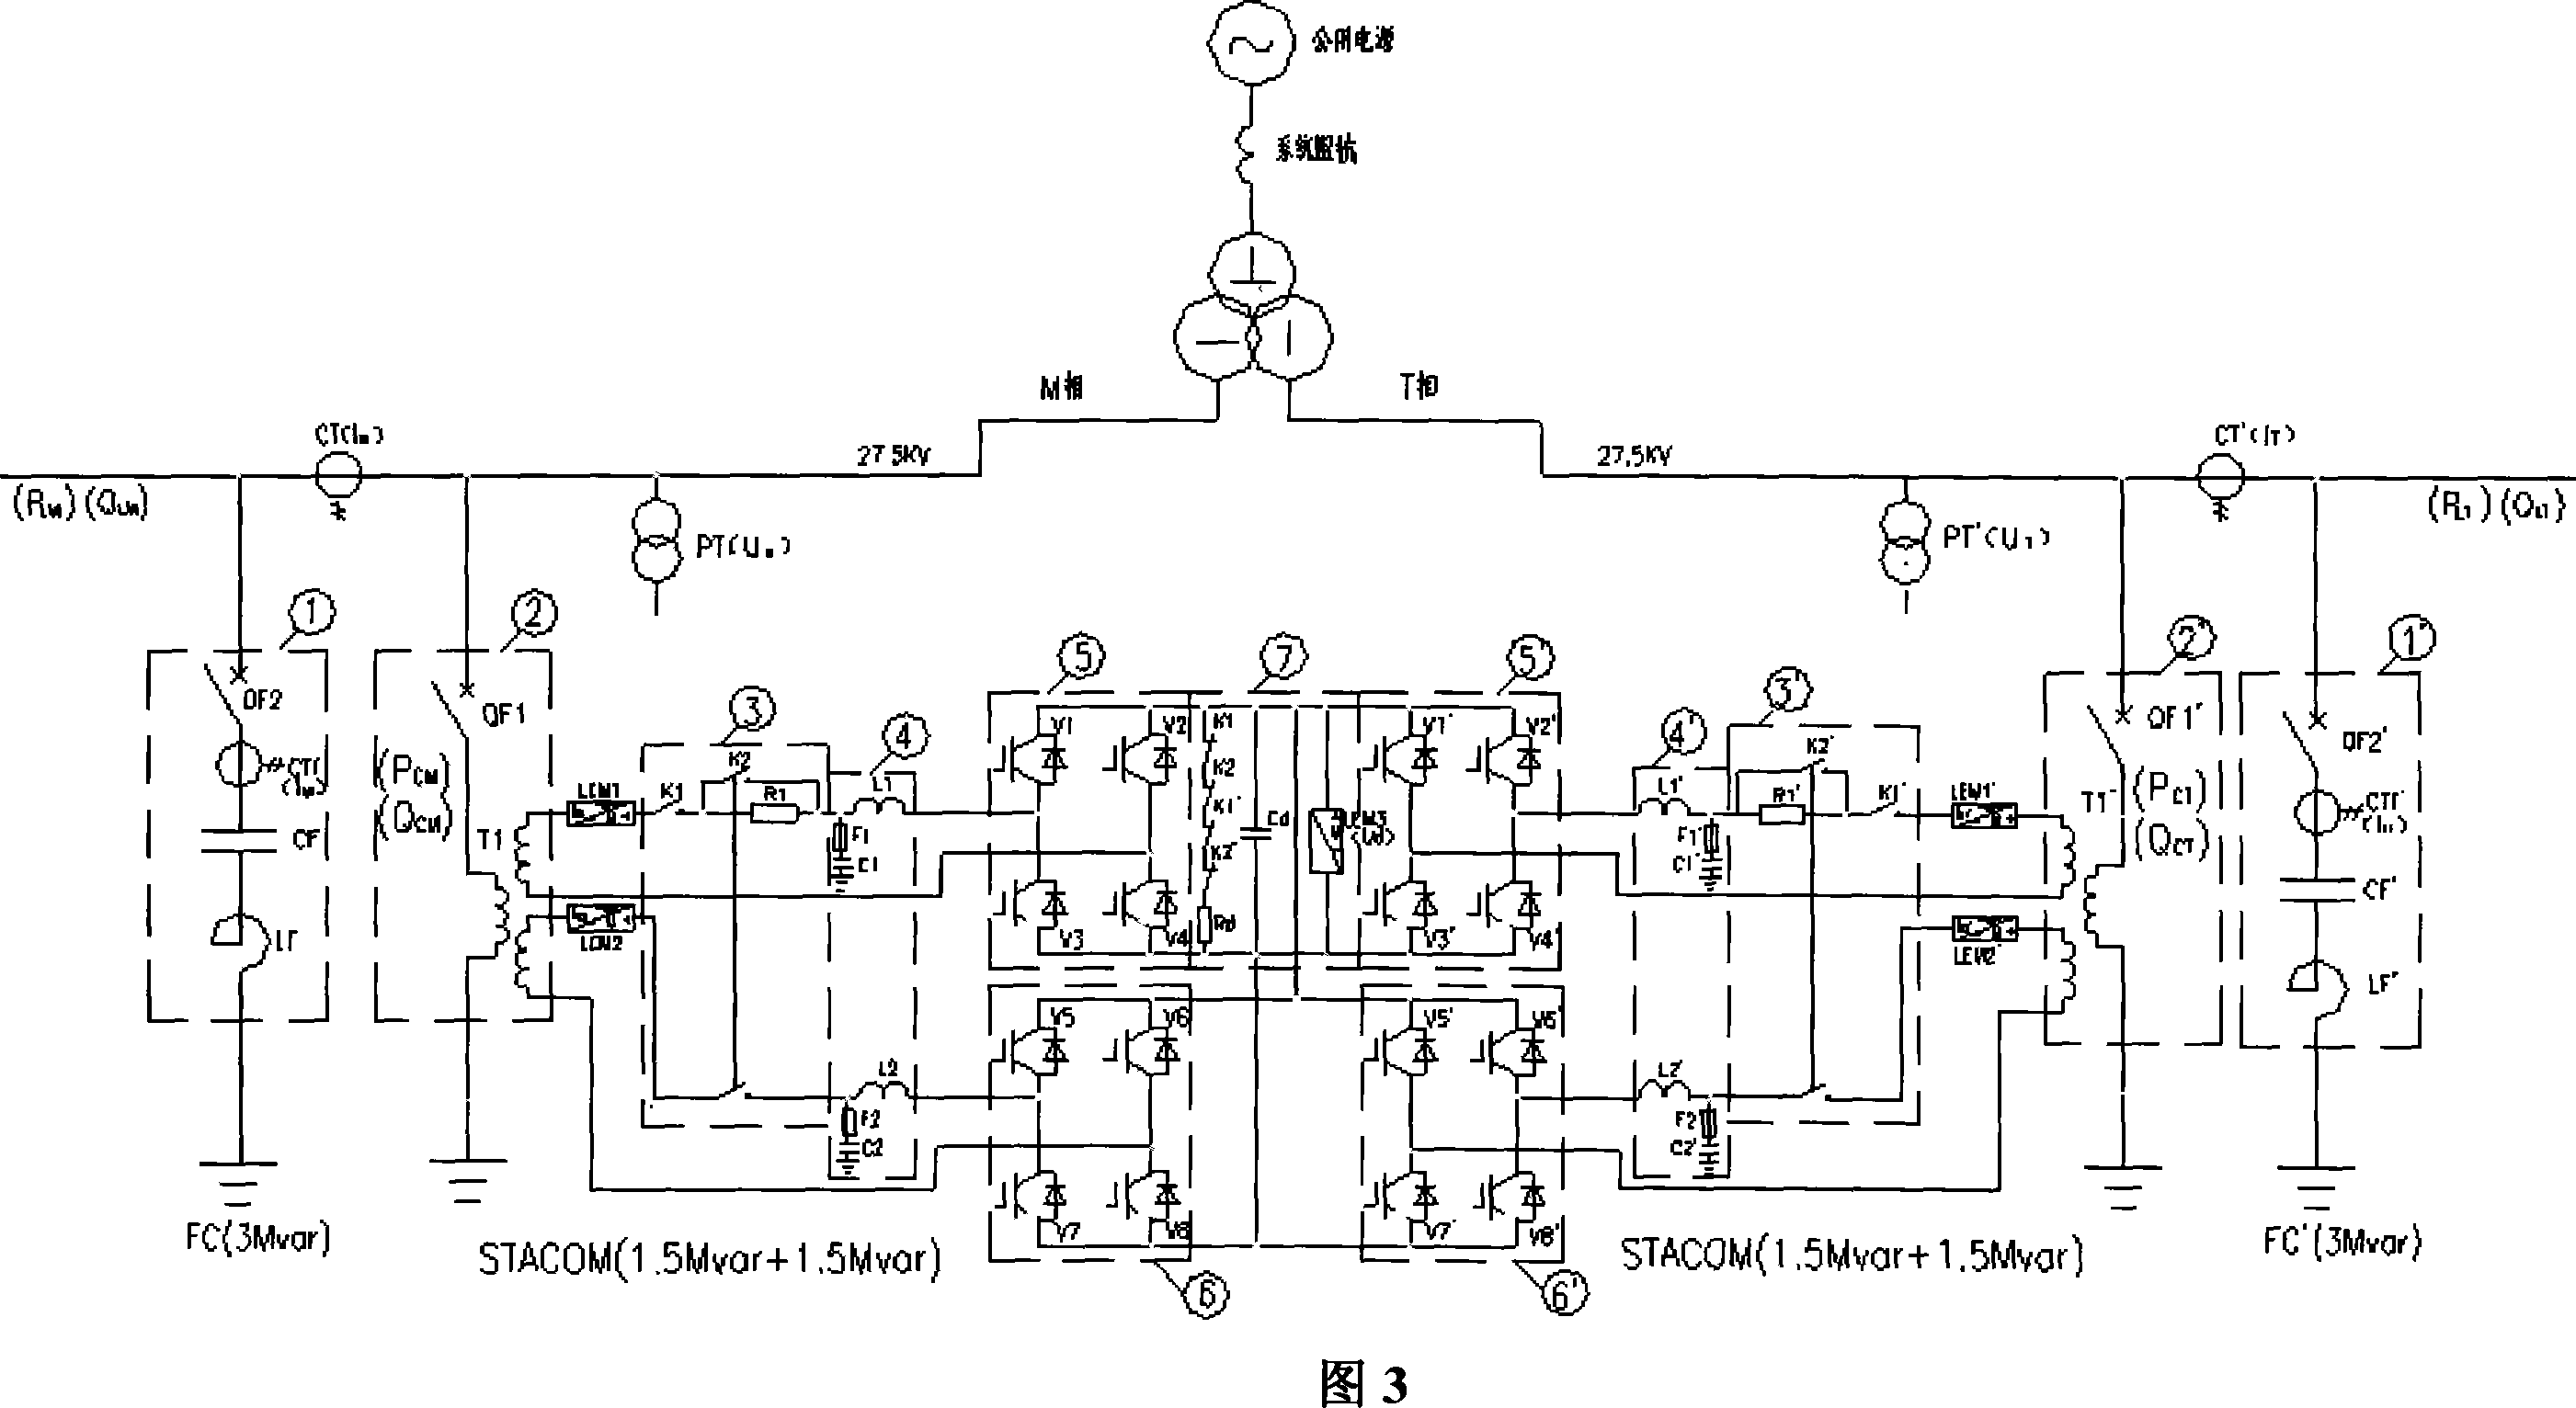 Mixed static synchronous reactive compensator